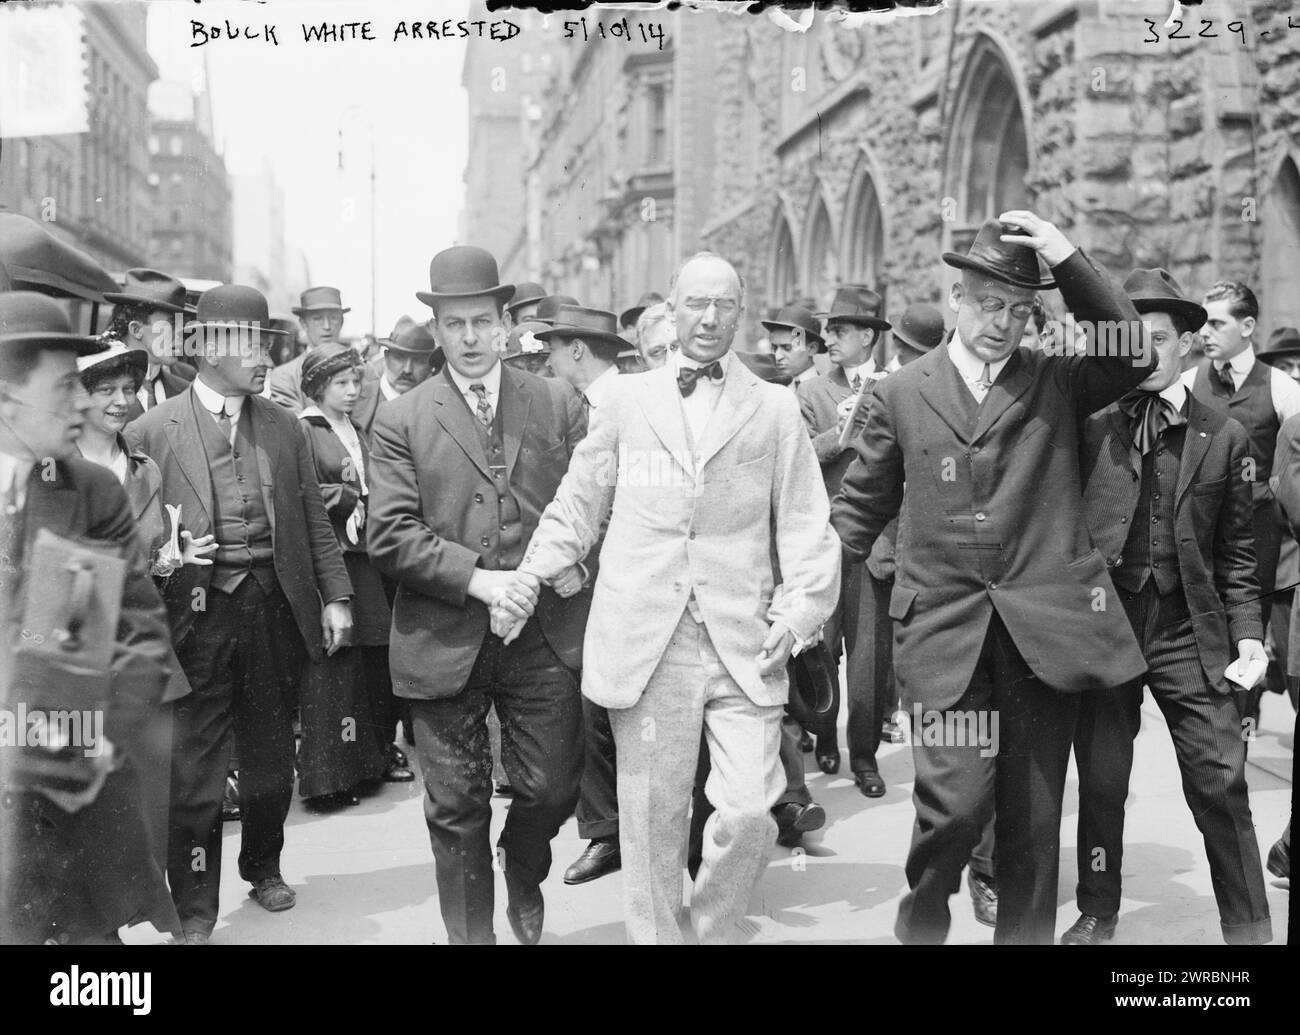 Bouck White arrested, Photograph shows the arrest of minister and socialist Bouck White (1874-1951), who was detained for disrupting a service at Calvary Baptist Church, West 57th Street, New York City, the church where John D. Rockefeller worshiped., 1914 May 10, Glass negatives, 1 negative: glass Stock Photo